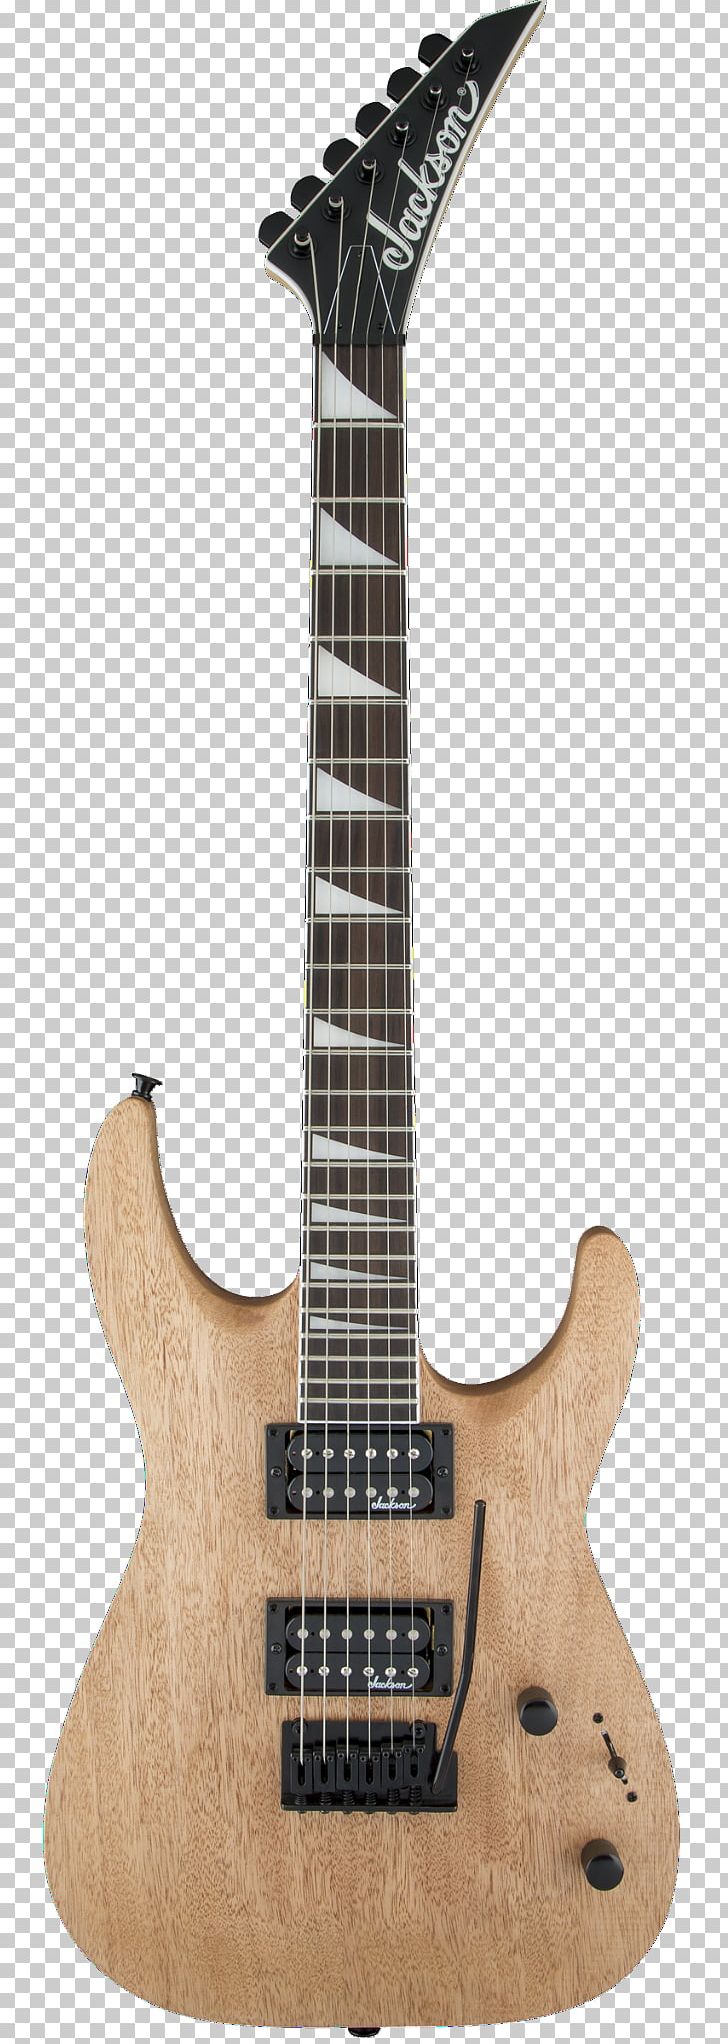 Jackson Dinky Jackson JS22 Jackson JS32 Dinky DKA Jackson Guitars Musical Instruments PNG, Clipart, Acoustic Electric Guitar, Archtop Guitar, Guitar Accessory, Music, Musical Instrument Free PNG Download